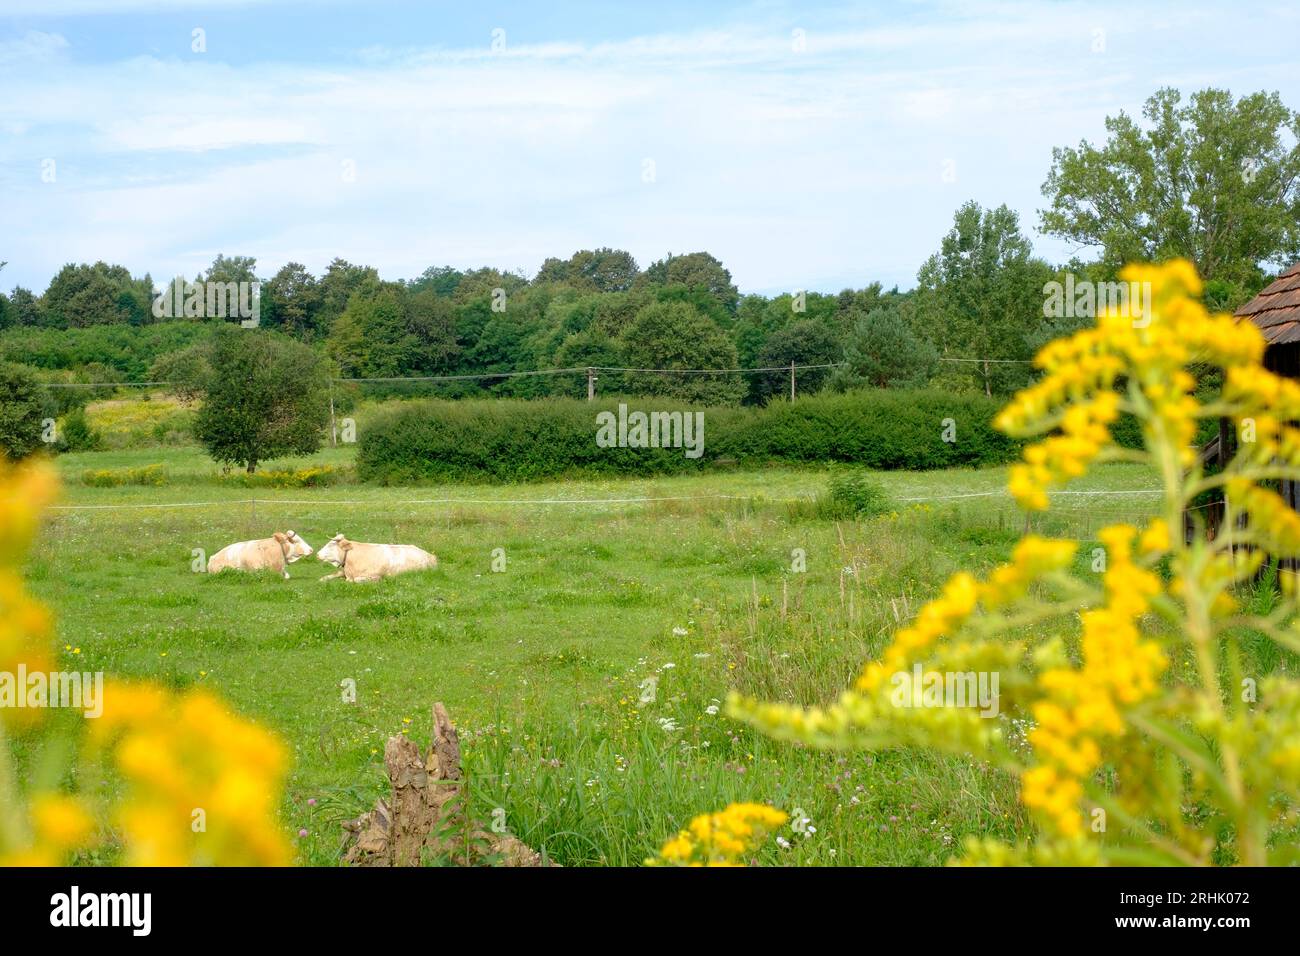 two dairy cows laying down in rural farm field framed by goldenrod solidago in foreground zala county hungary Stock Photo